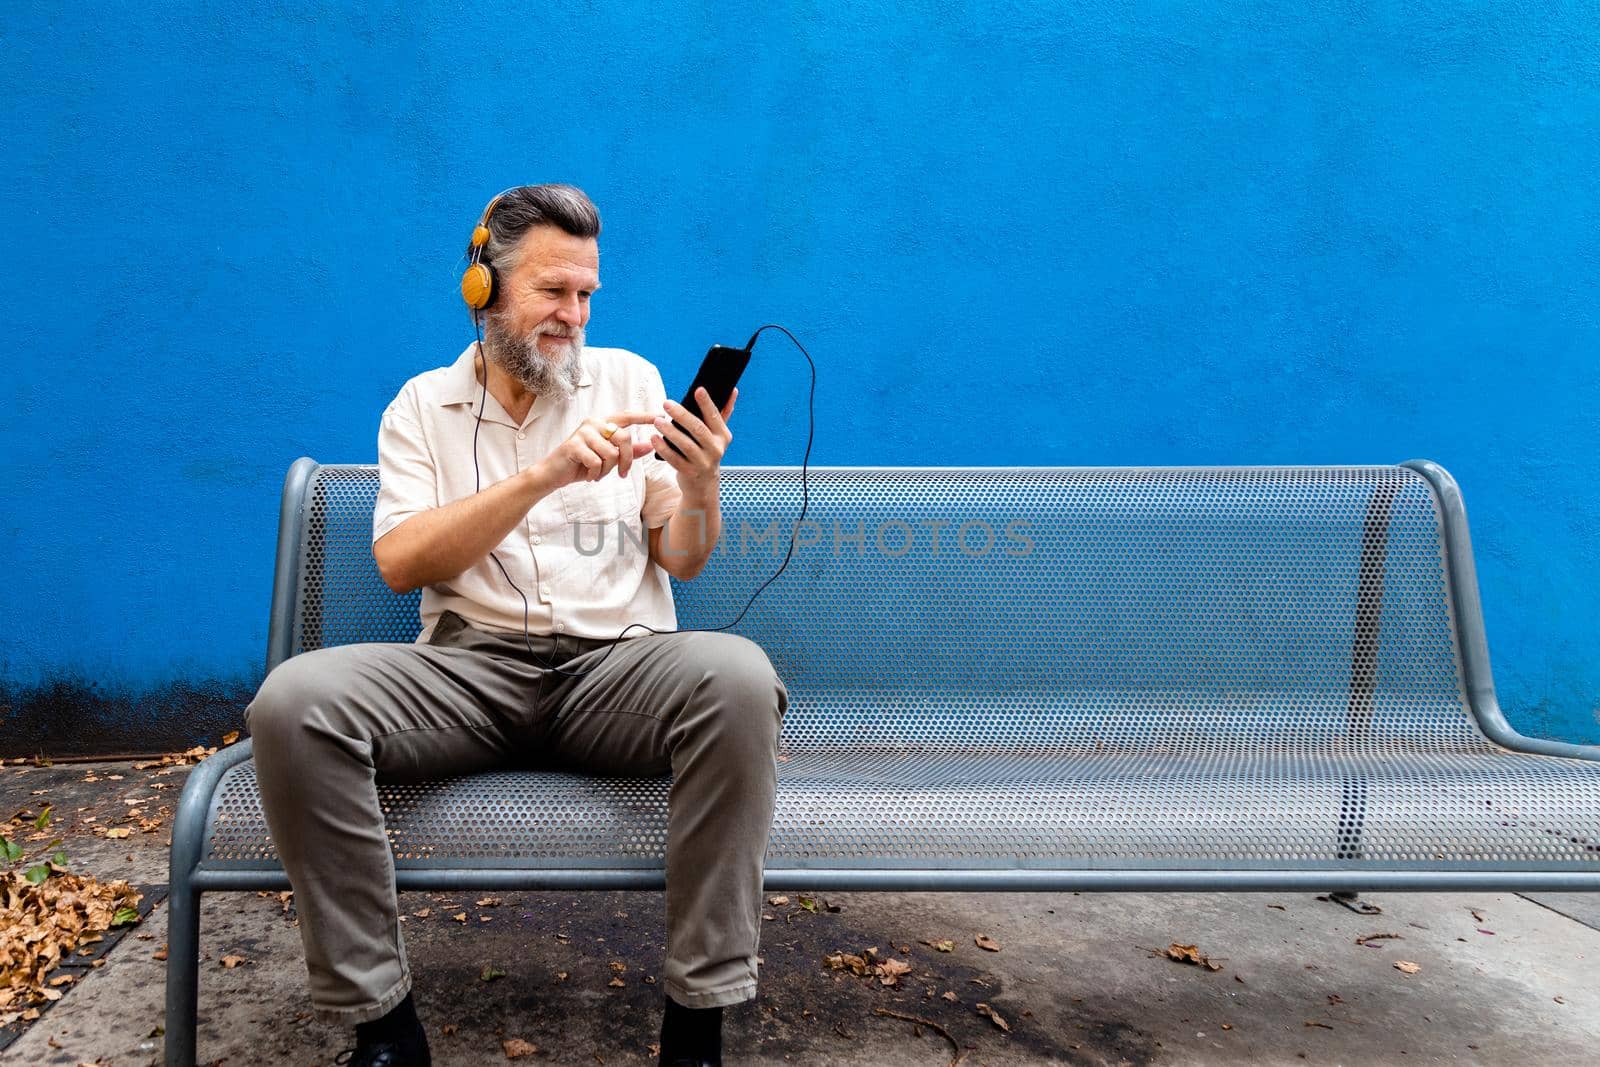 Mature caucasian man sit on a bench in public park using phone and listening to music with headphones. Copy space. Lifestyle concept.